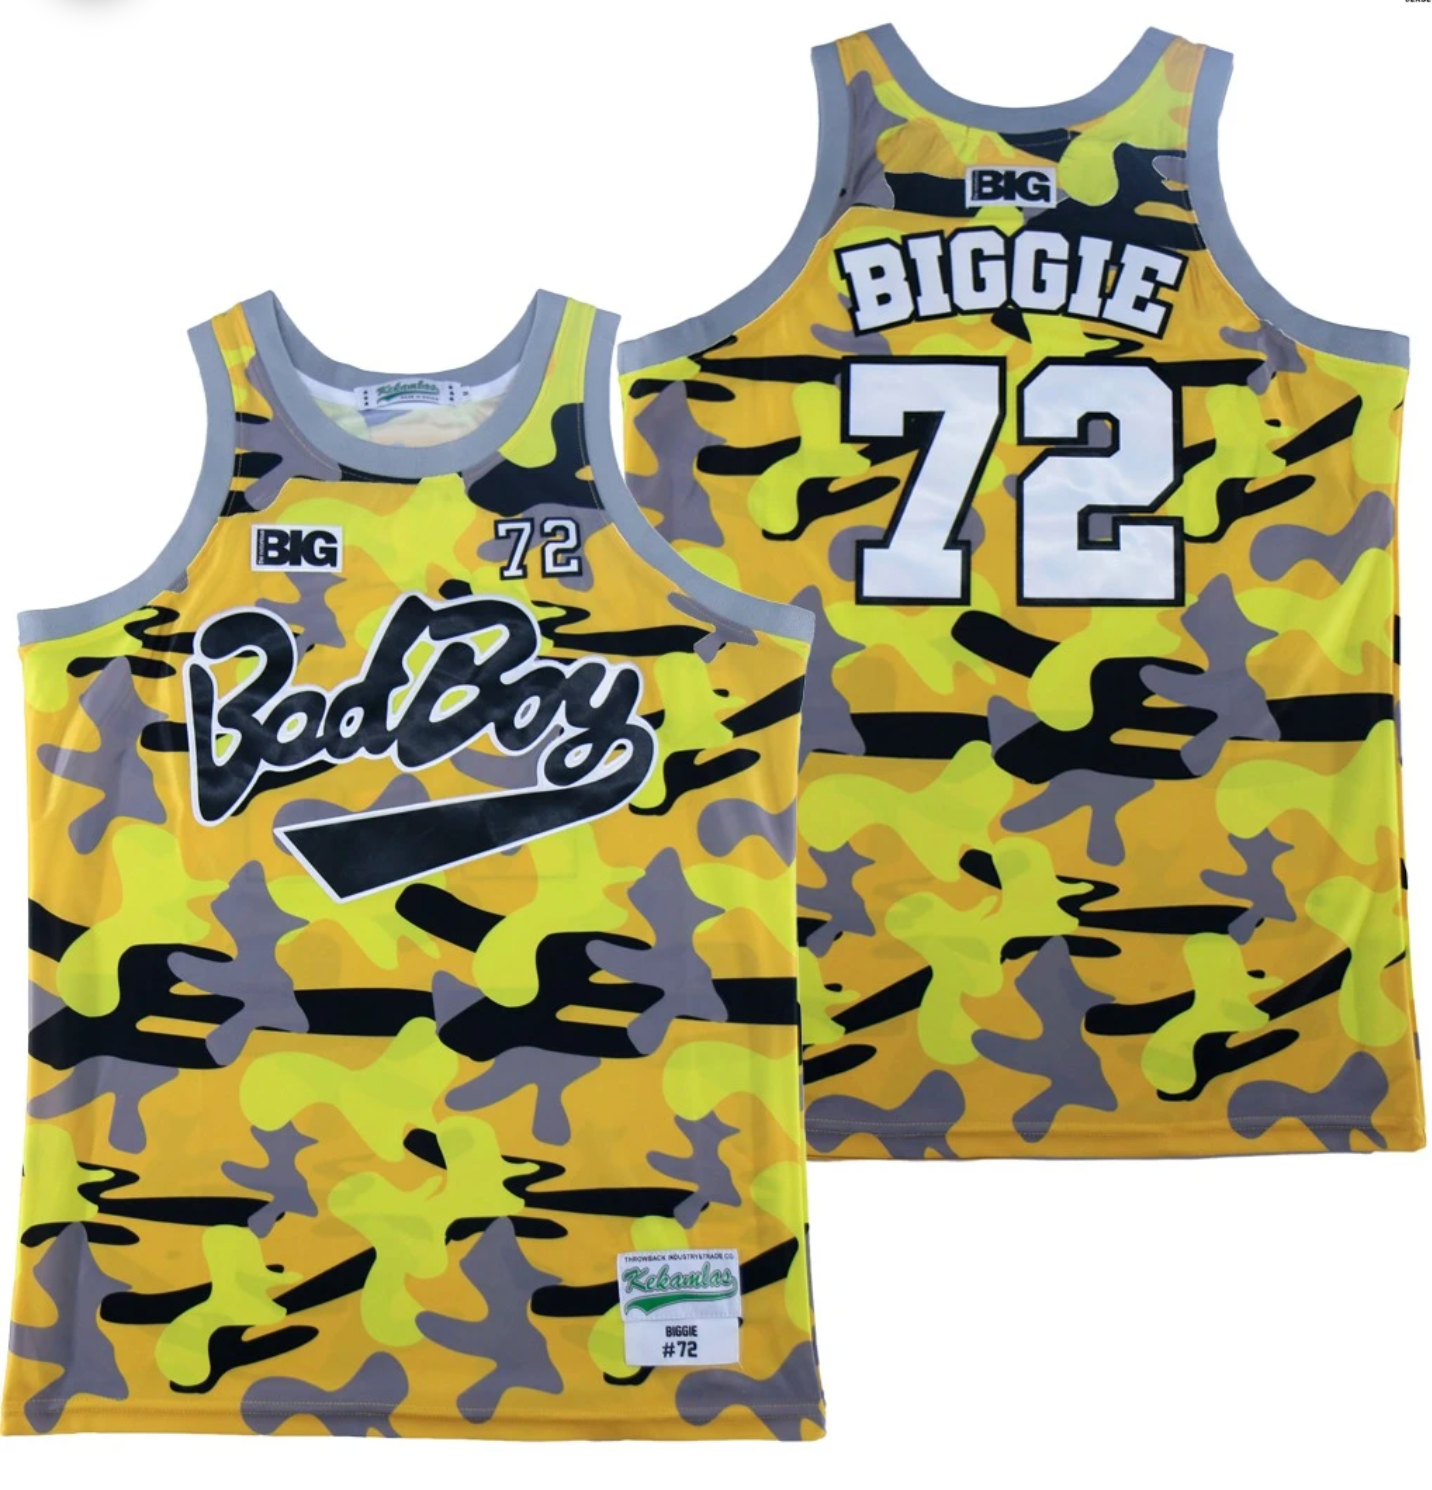 The yellow Bad Boy basketball jersey worn by The Notorious B.I.G. in his  music video Juicy